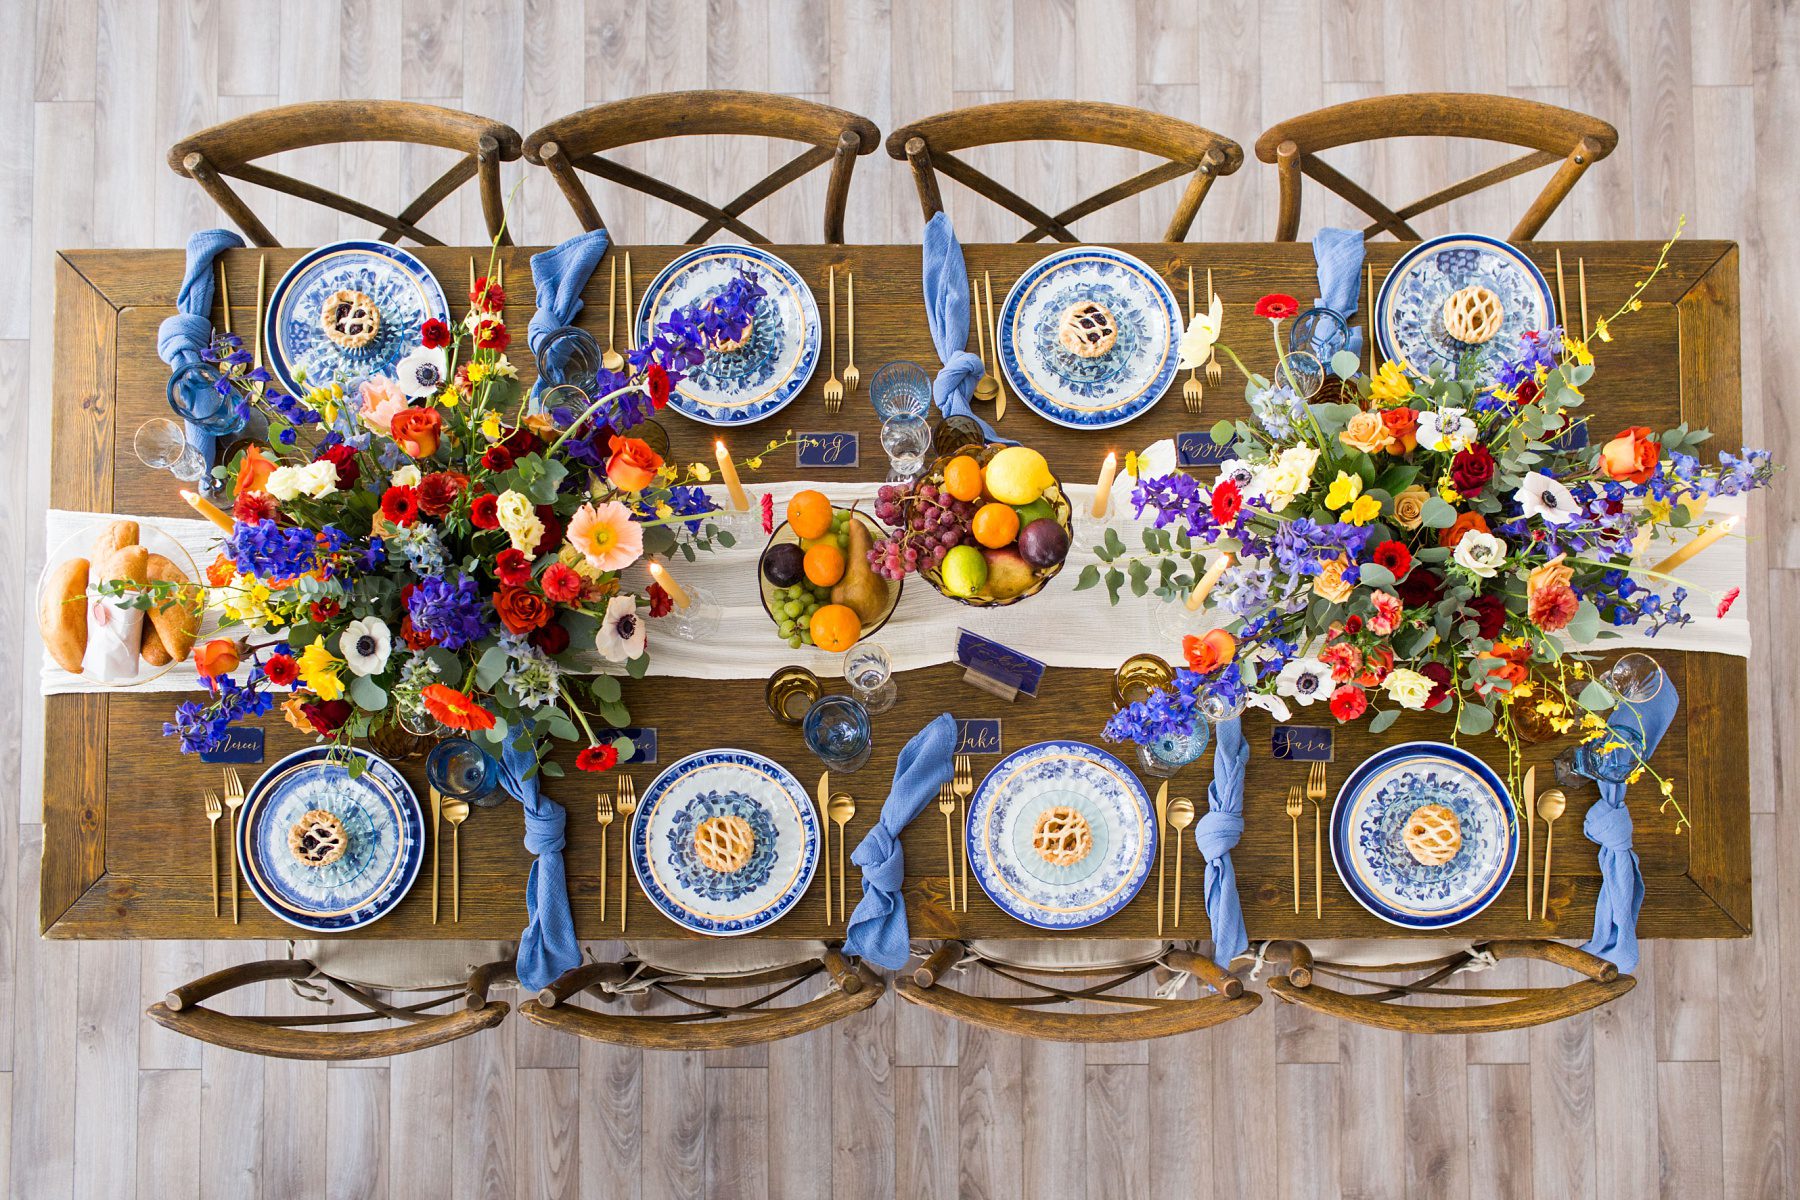 long dinner table with fancy place settings and colorful flowers